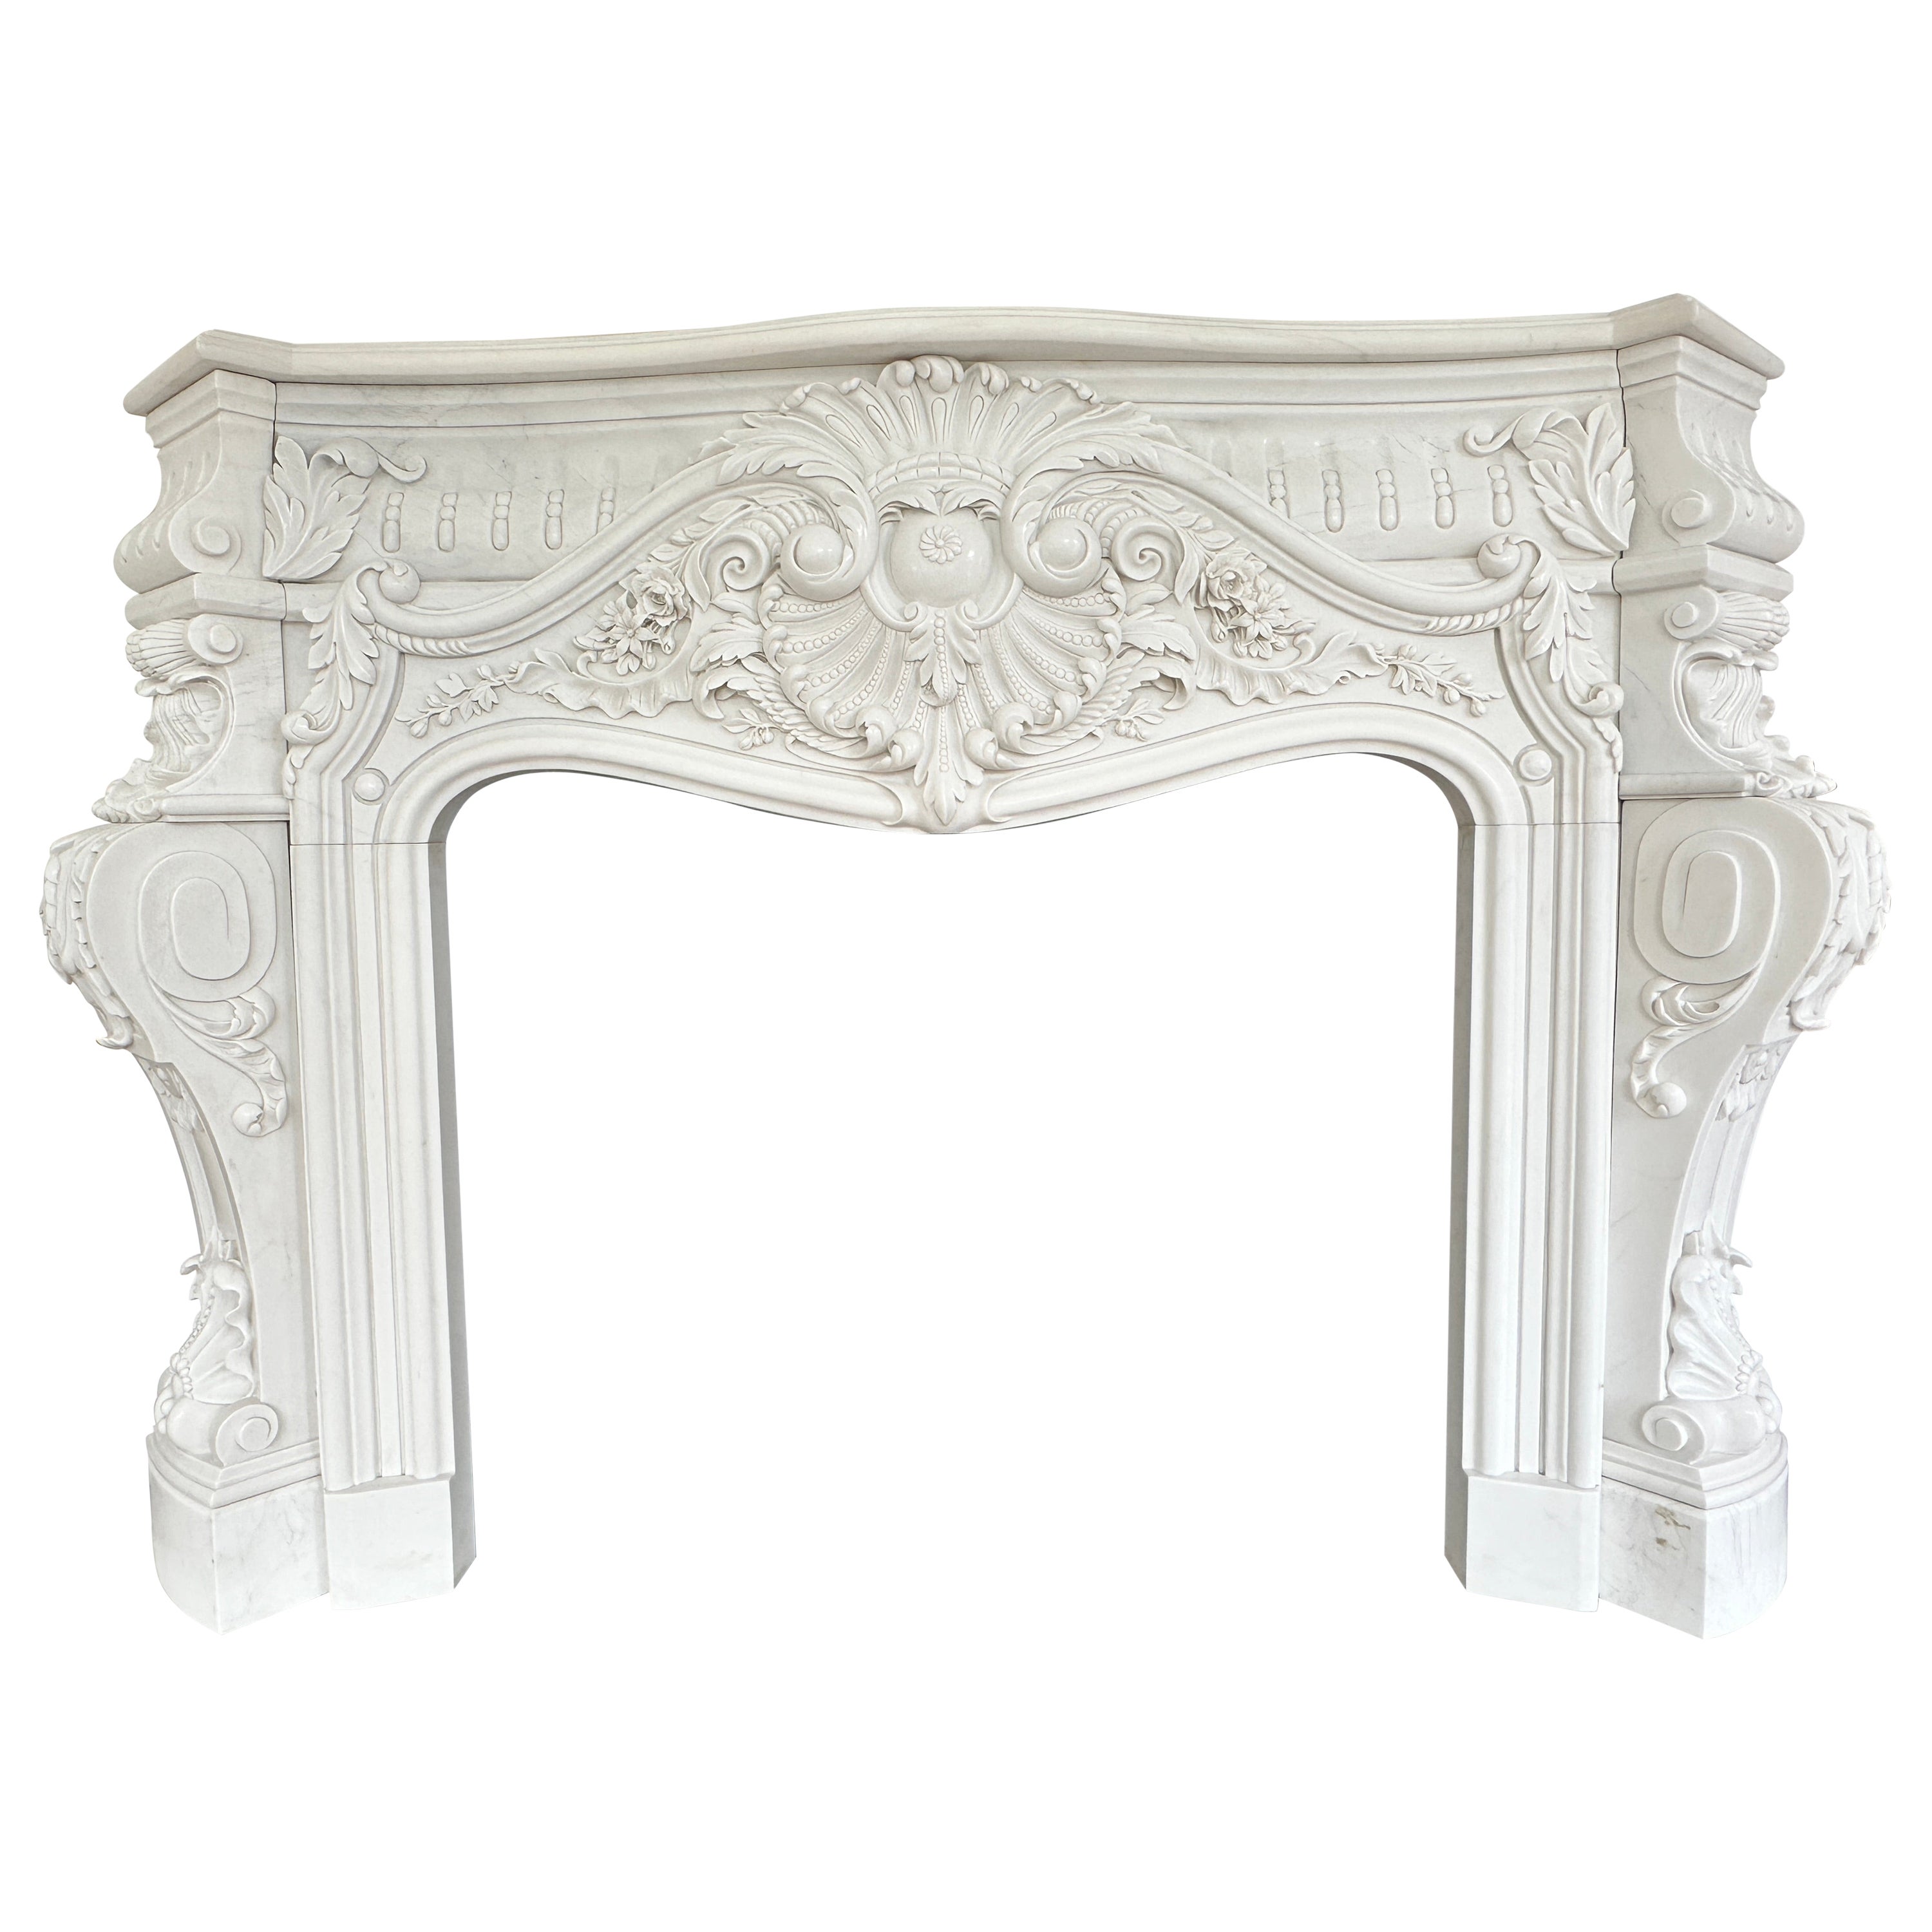 A Very large Reclaimed French Rococo White Marble Fireplace